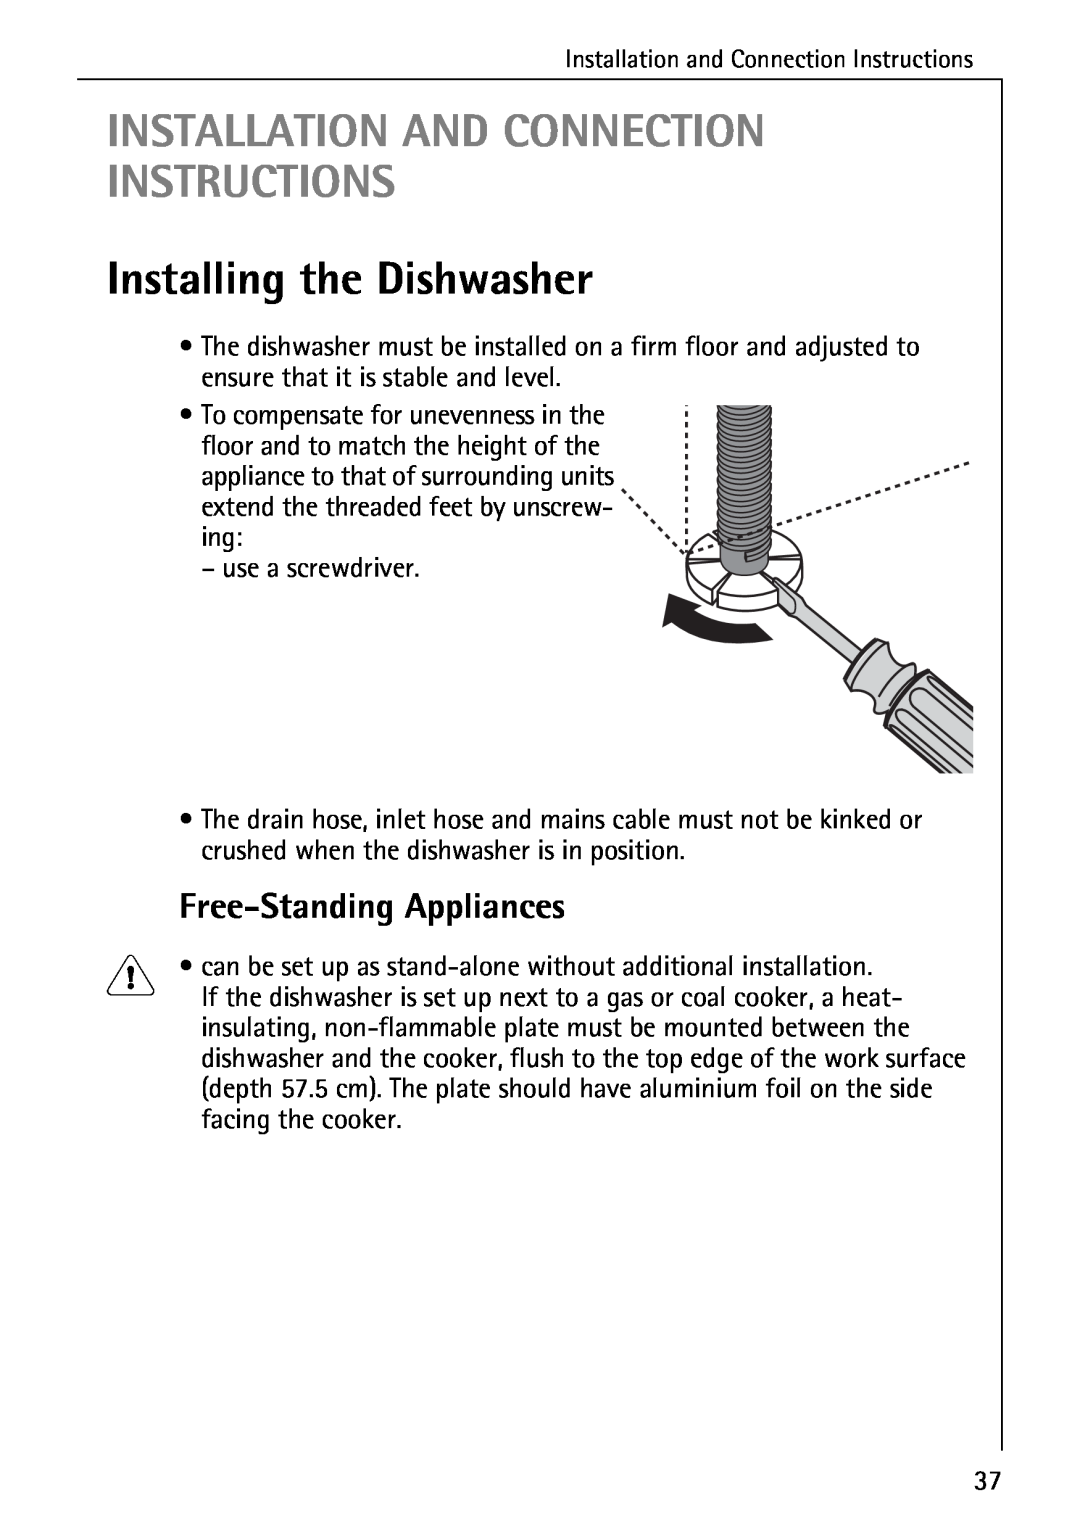 AEG 80800 manual Installation And Connection Instructions, Installing the Dishwasher, Free-Standing Appliances 